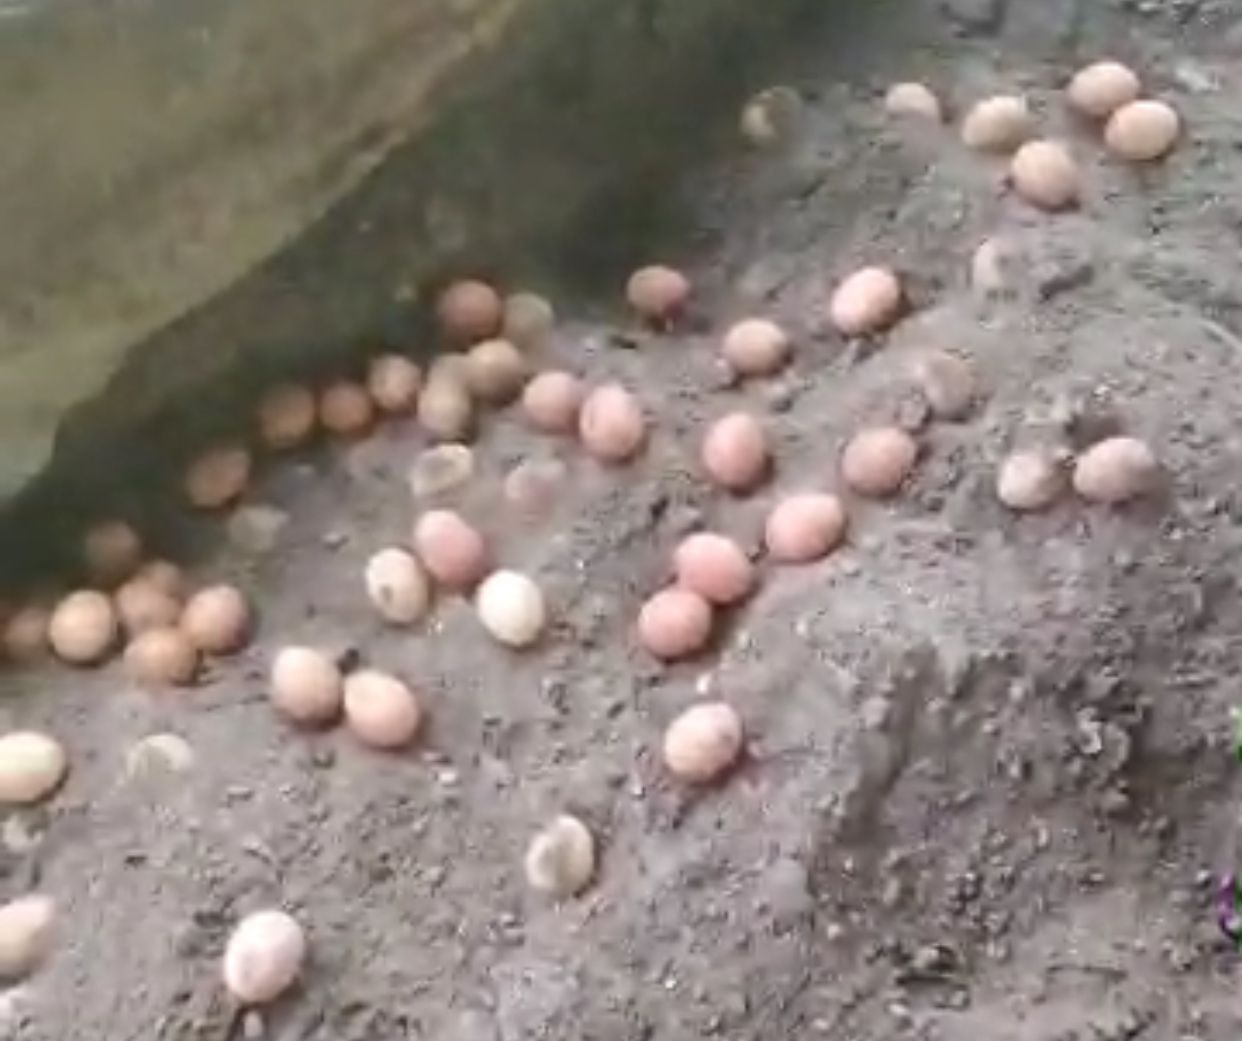 Buried stolen eggs at the unknown poultry